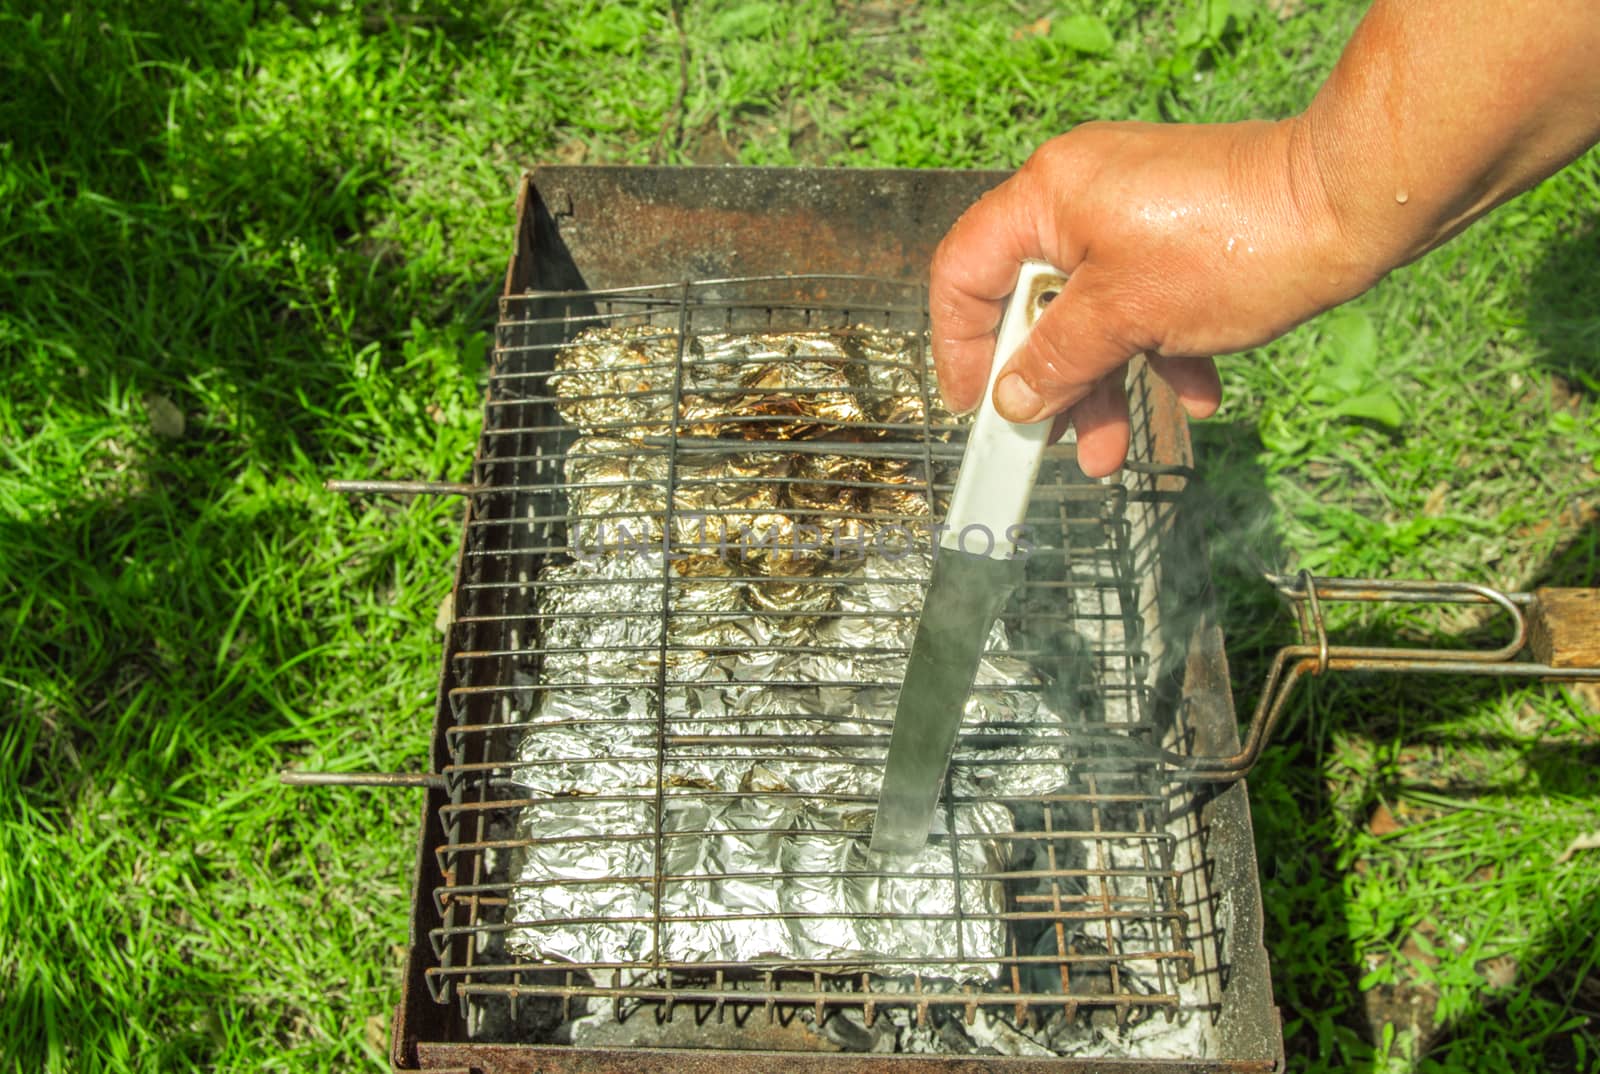 The hand of a person checks the readiness of food with a knife. Cooking baked vegetables in foil on the grill. The concept of healthy eating, outdoor.